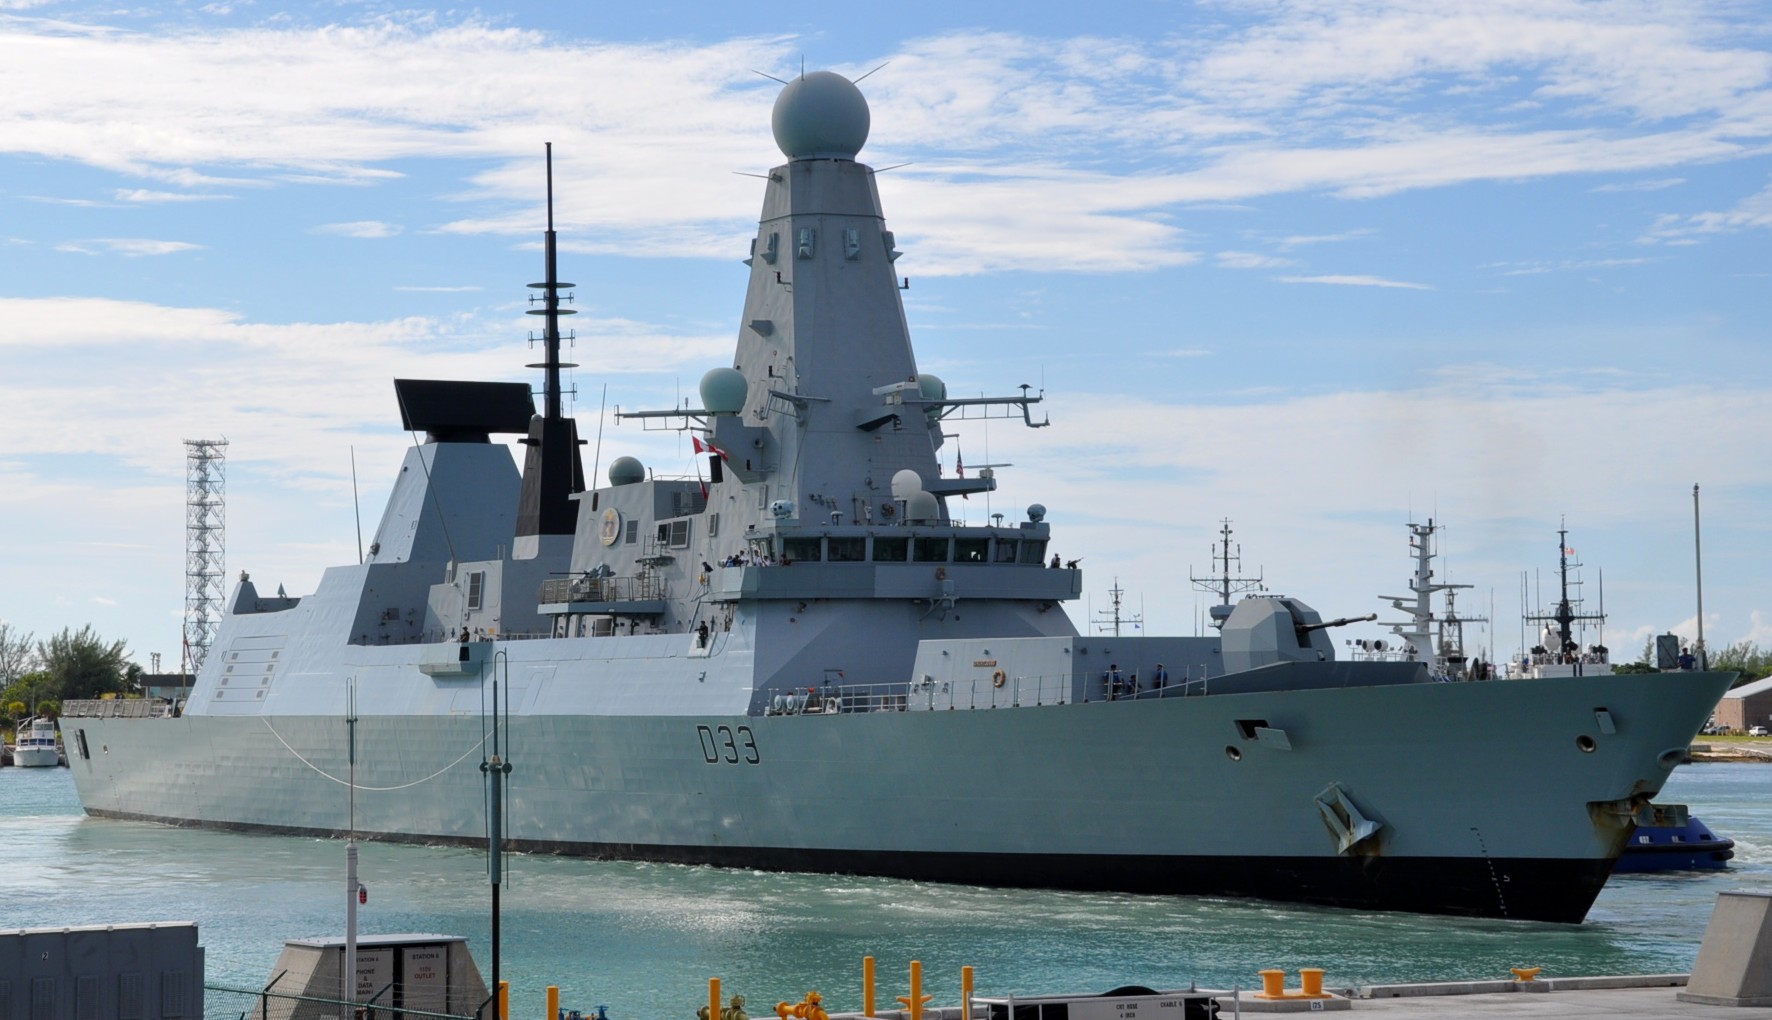 hms dauntless d-33 type 45 daring class guided missile destroyer royal navy sea viper paams 06